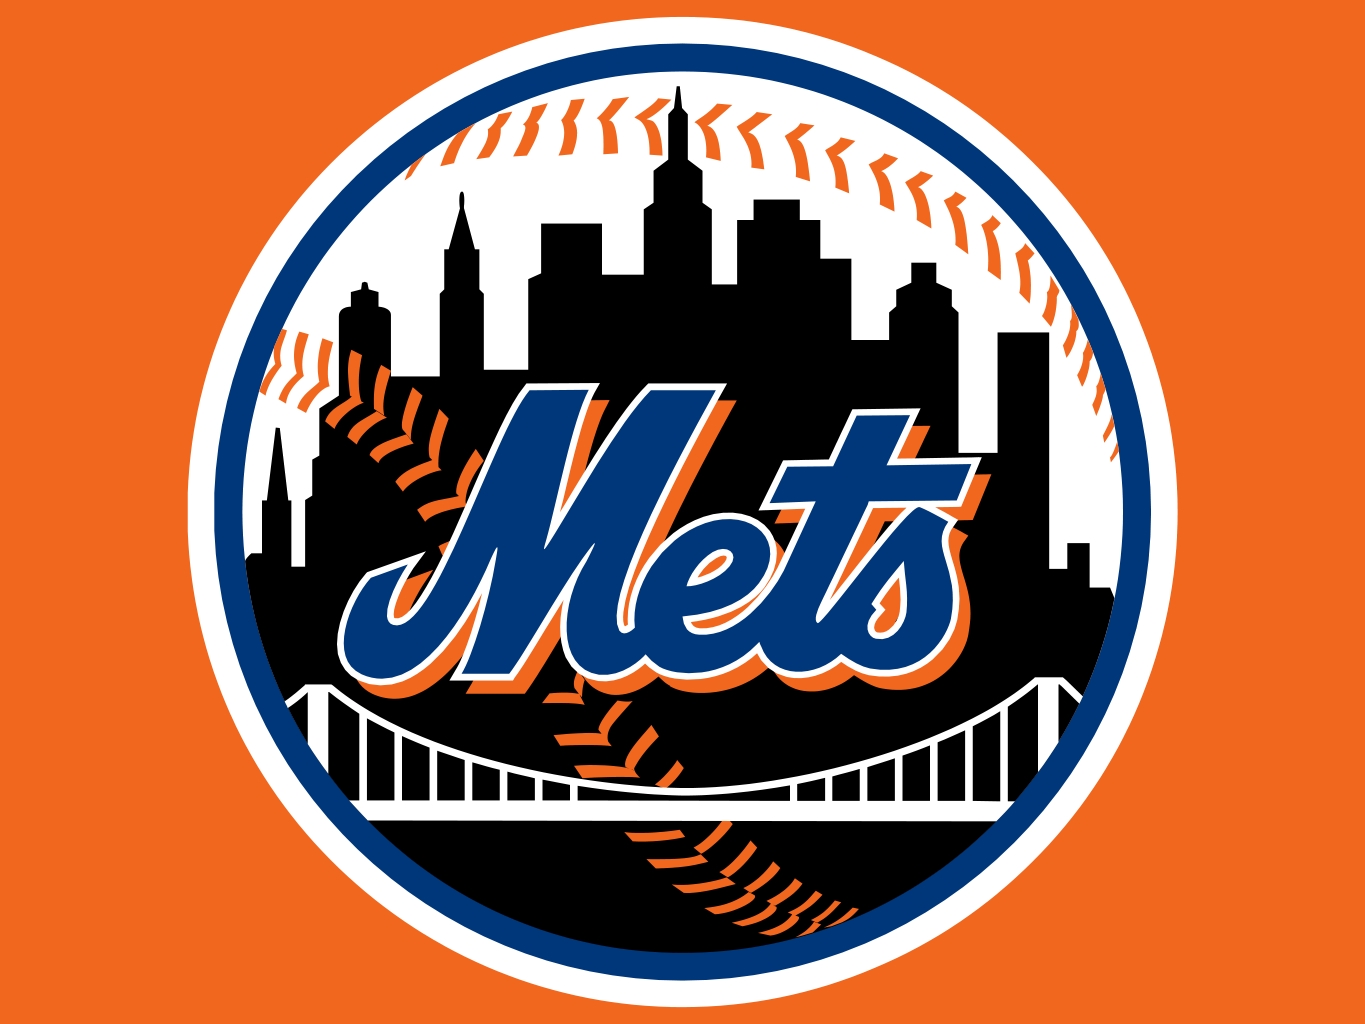 Awesome New York Mets wallpaper New York Mets wallpapers